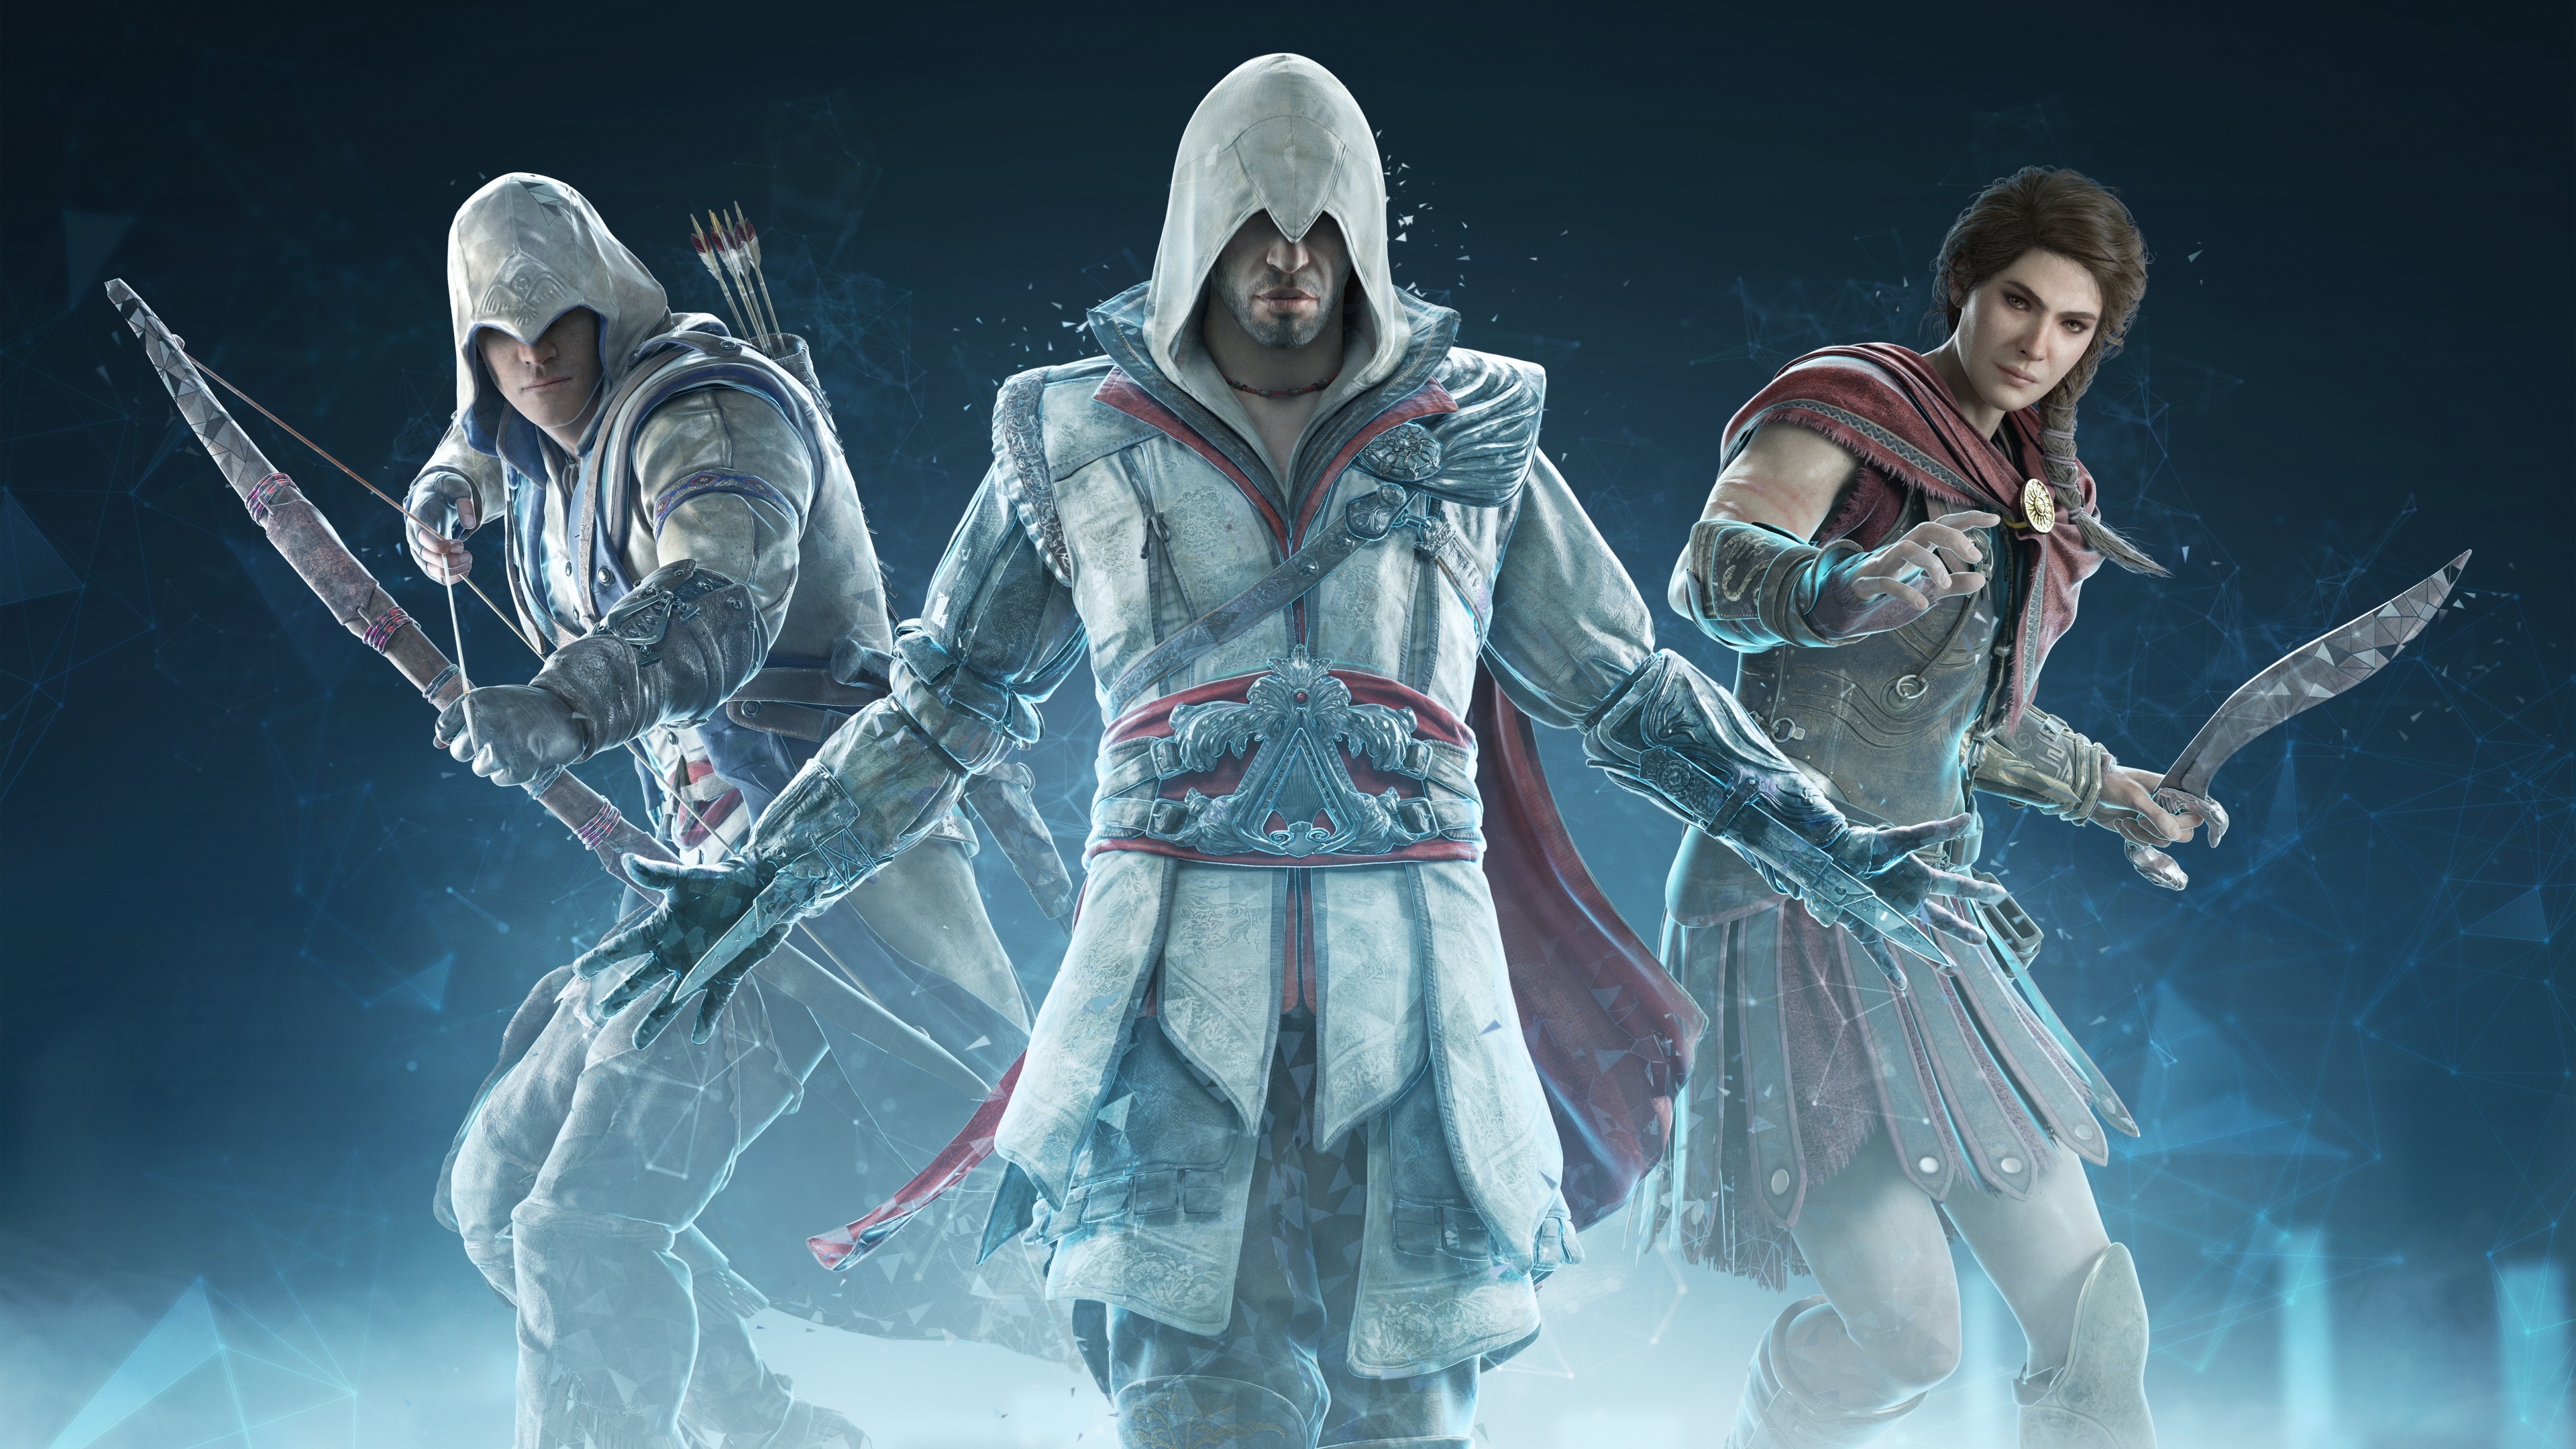 Video Game Assassin's Creed Nexus HD Wallpaper | Background Image